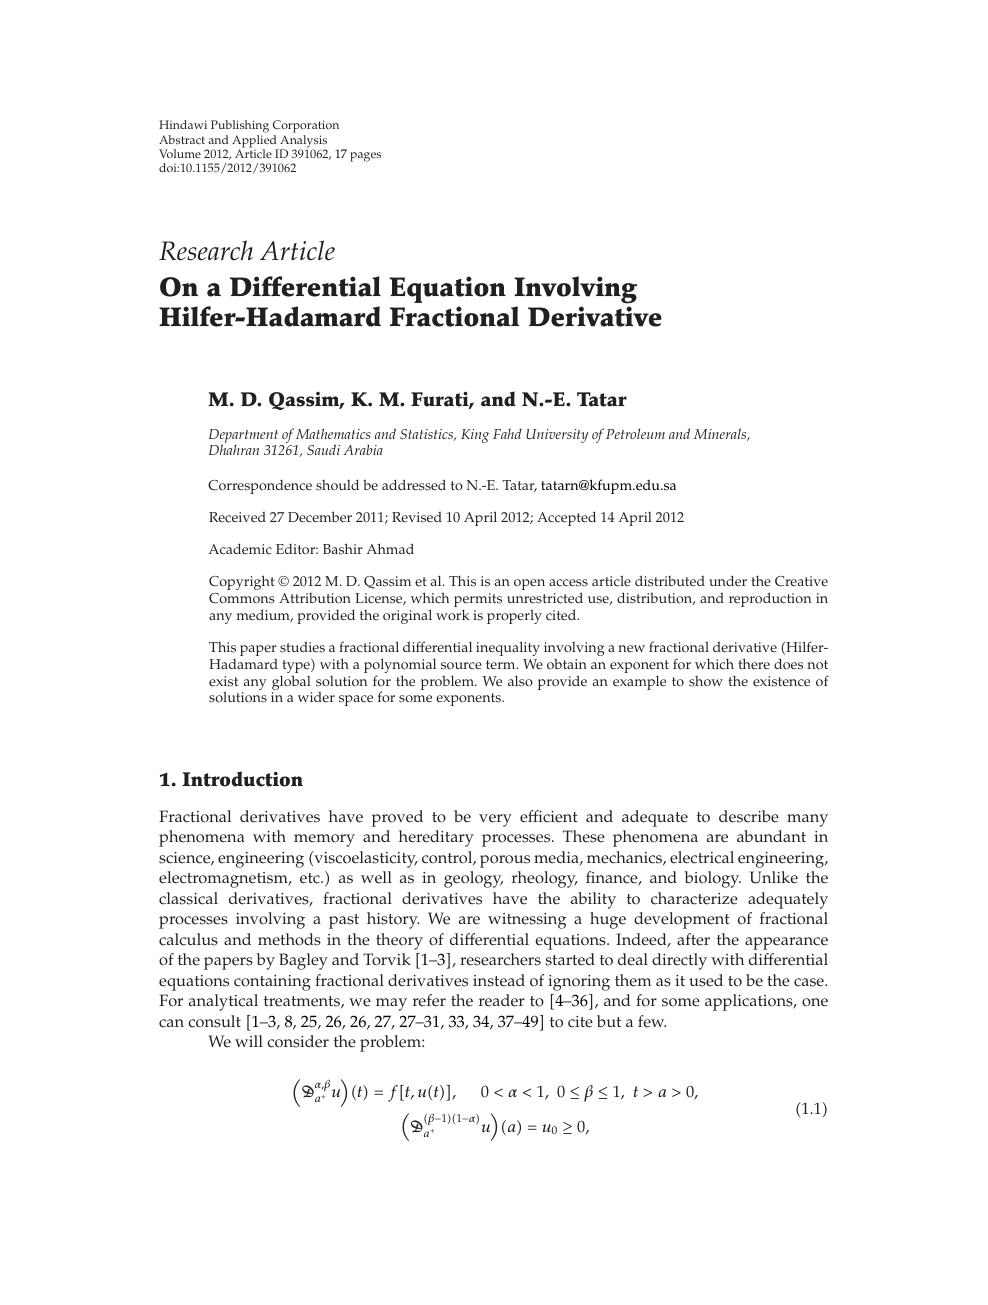 On A Differential Equation Involving Hilfer Hadamard Fractional Derivative Topic Of Research Paper In Mathematics Download Scholarly Article Pdf And Read For Free On Cyberleninka Open Science Hub